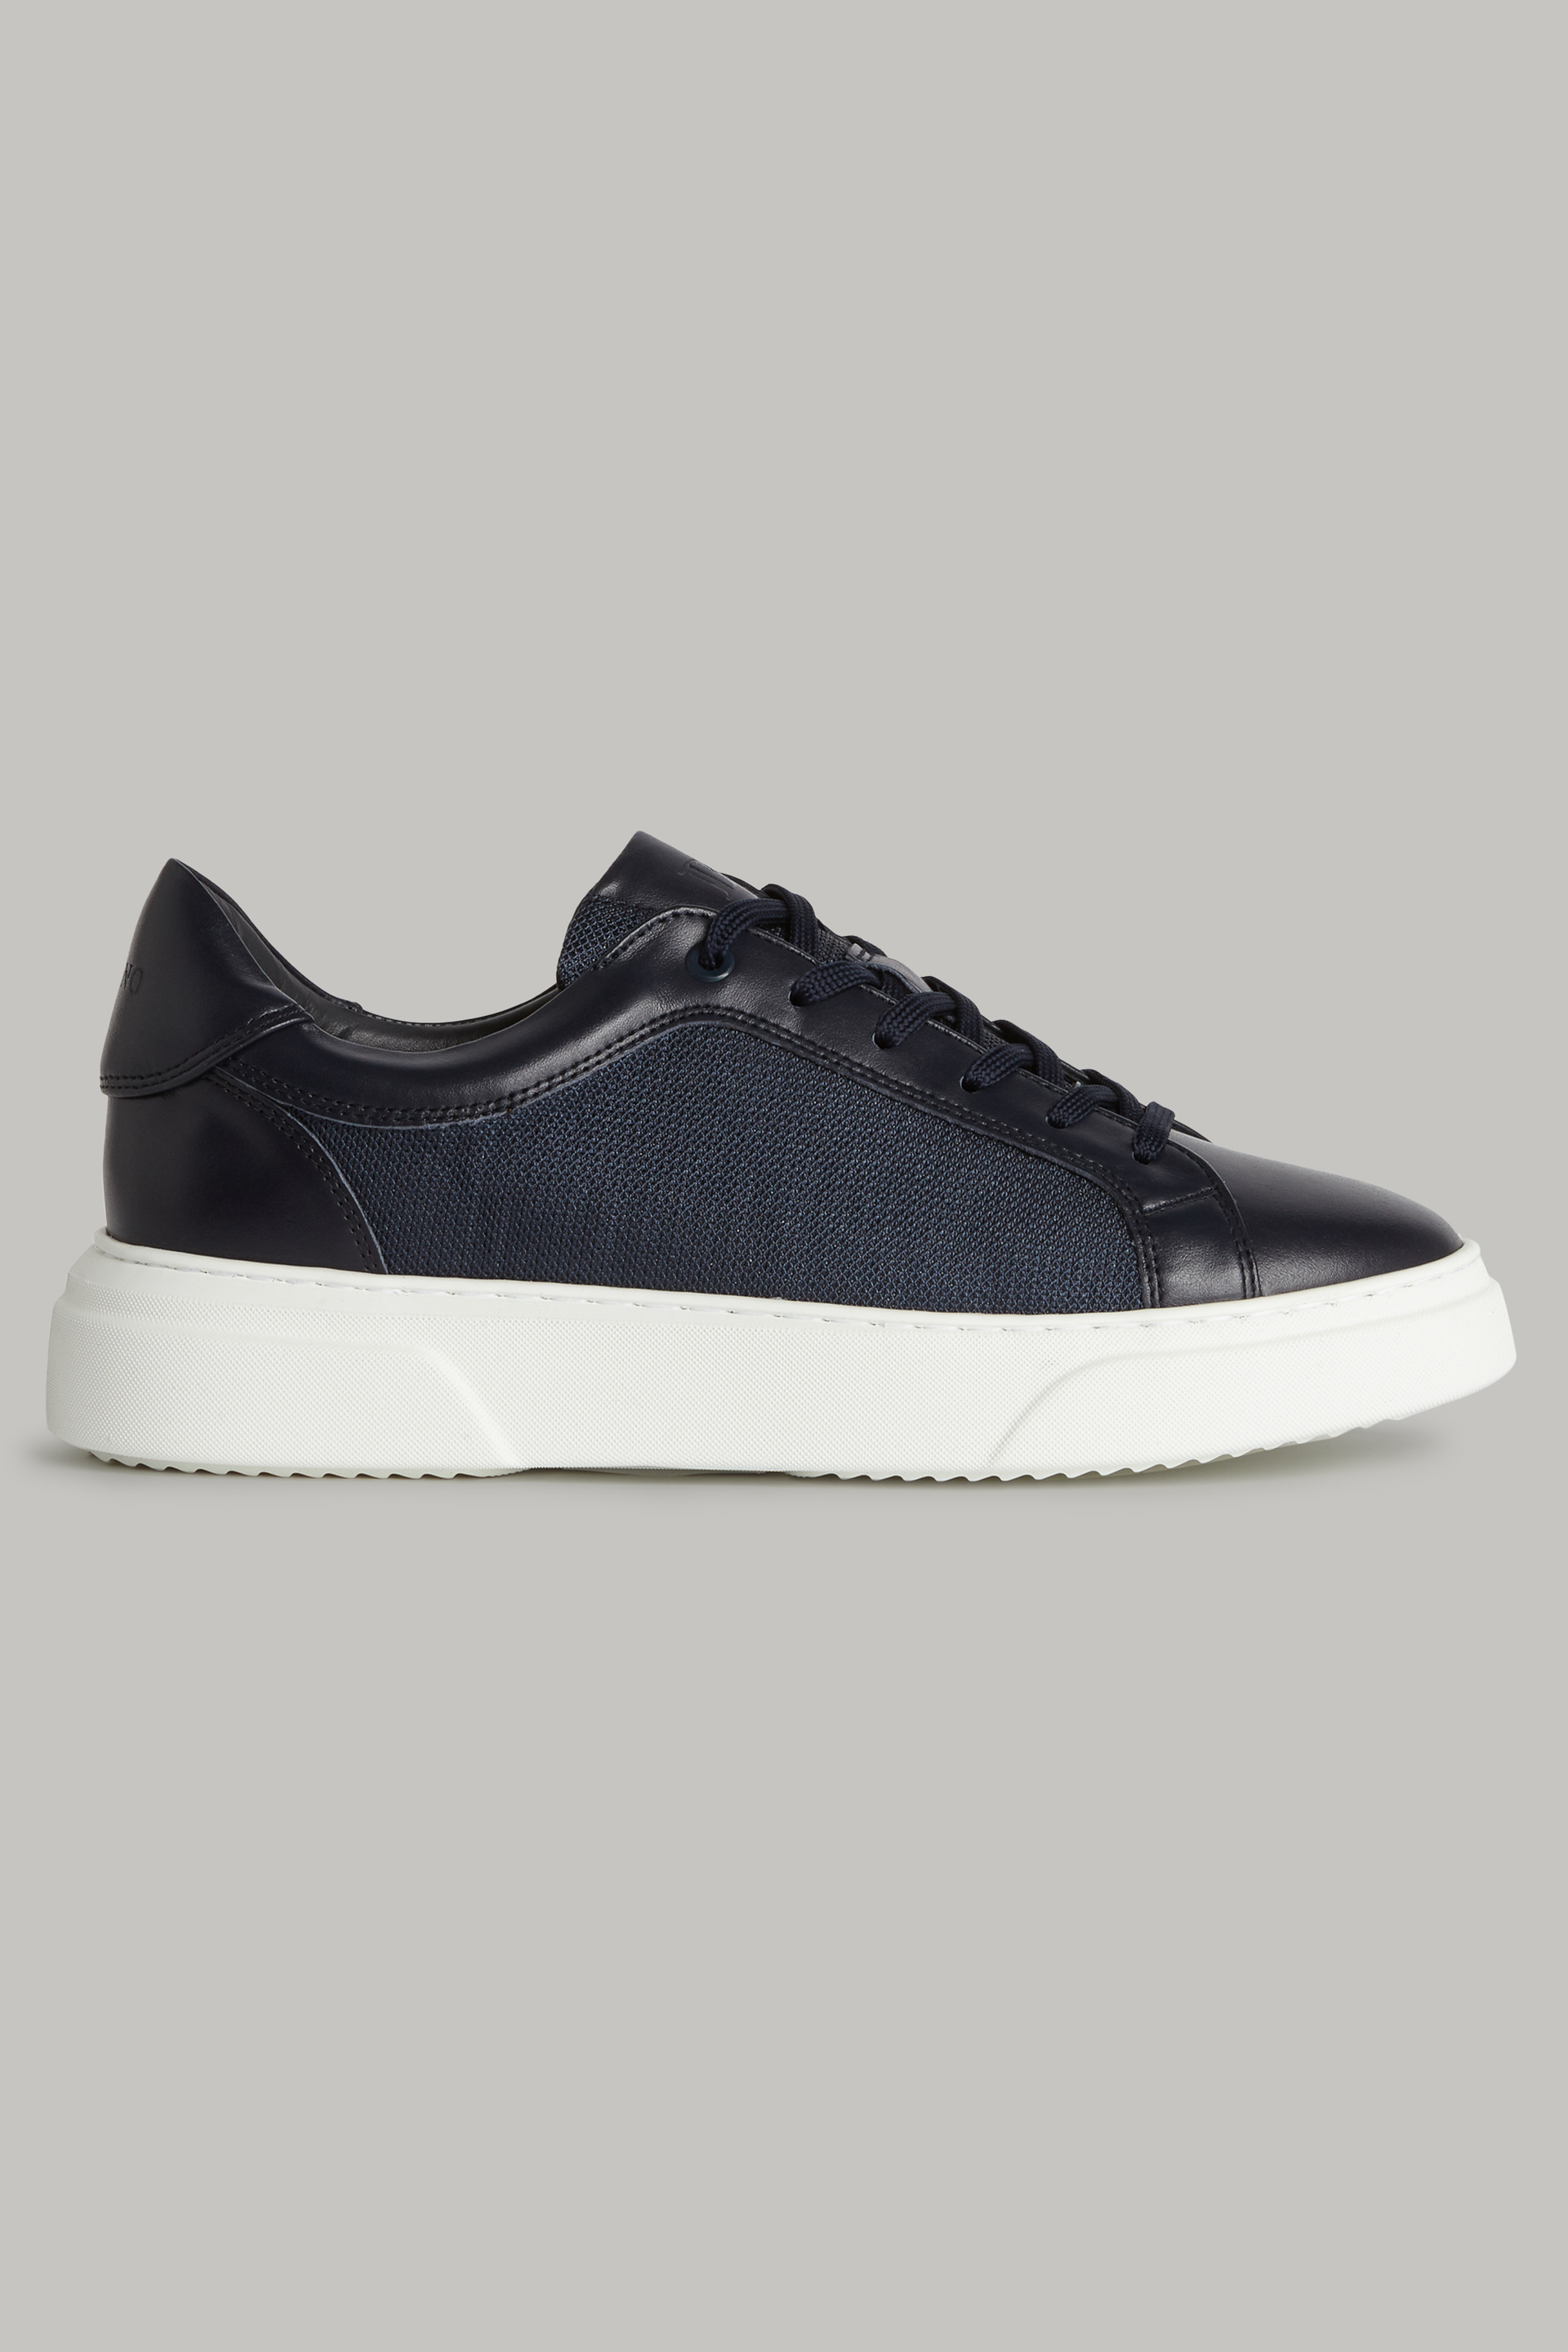 Tentacle traffic tool NAVY BLUE SNEAKERS IN TECHNICAL FABRIC AND LEATHER | Boggi